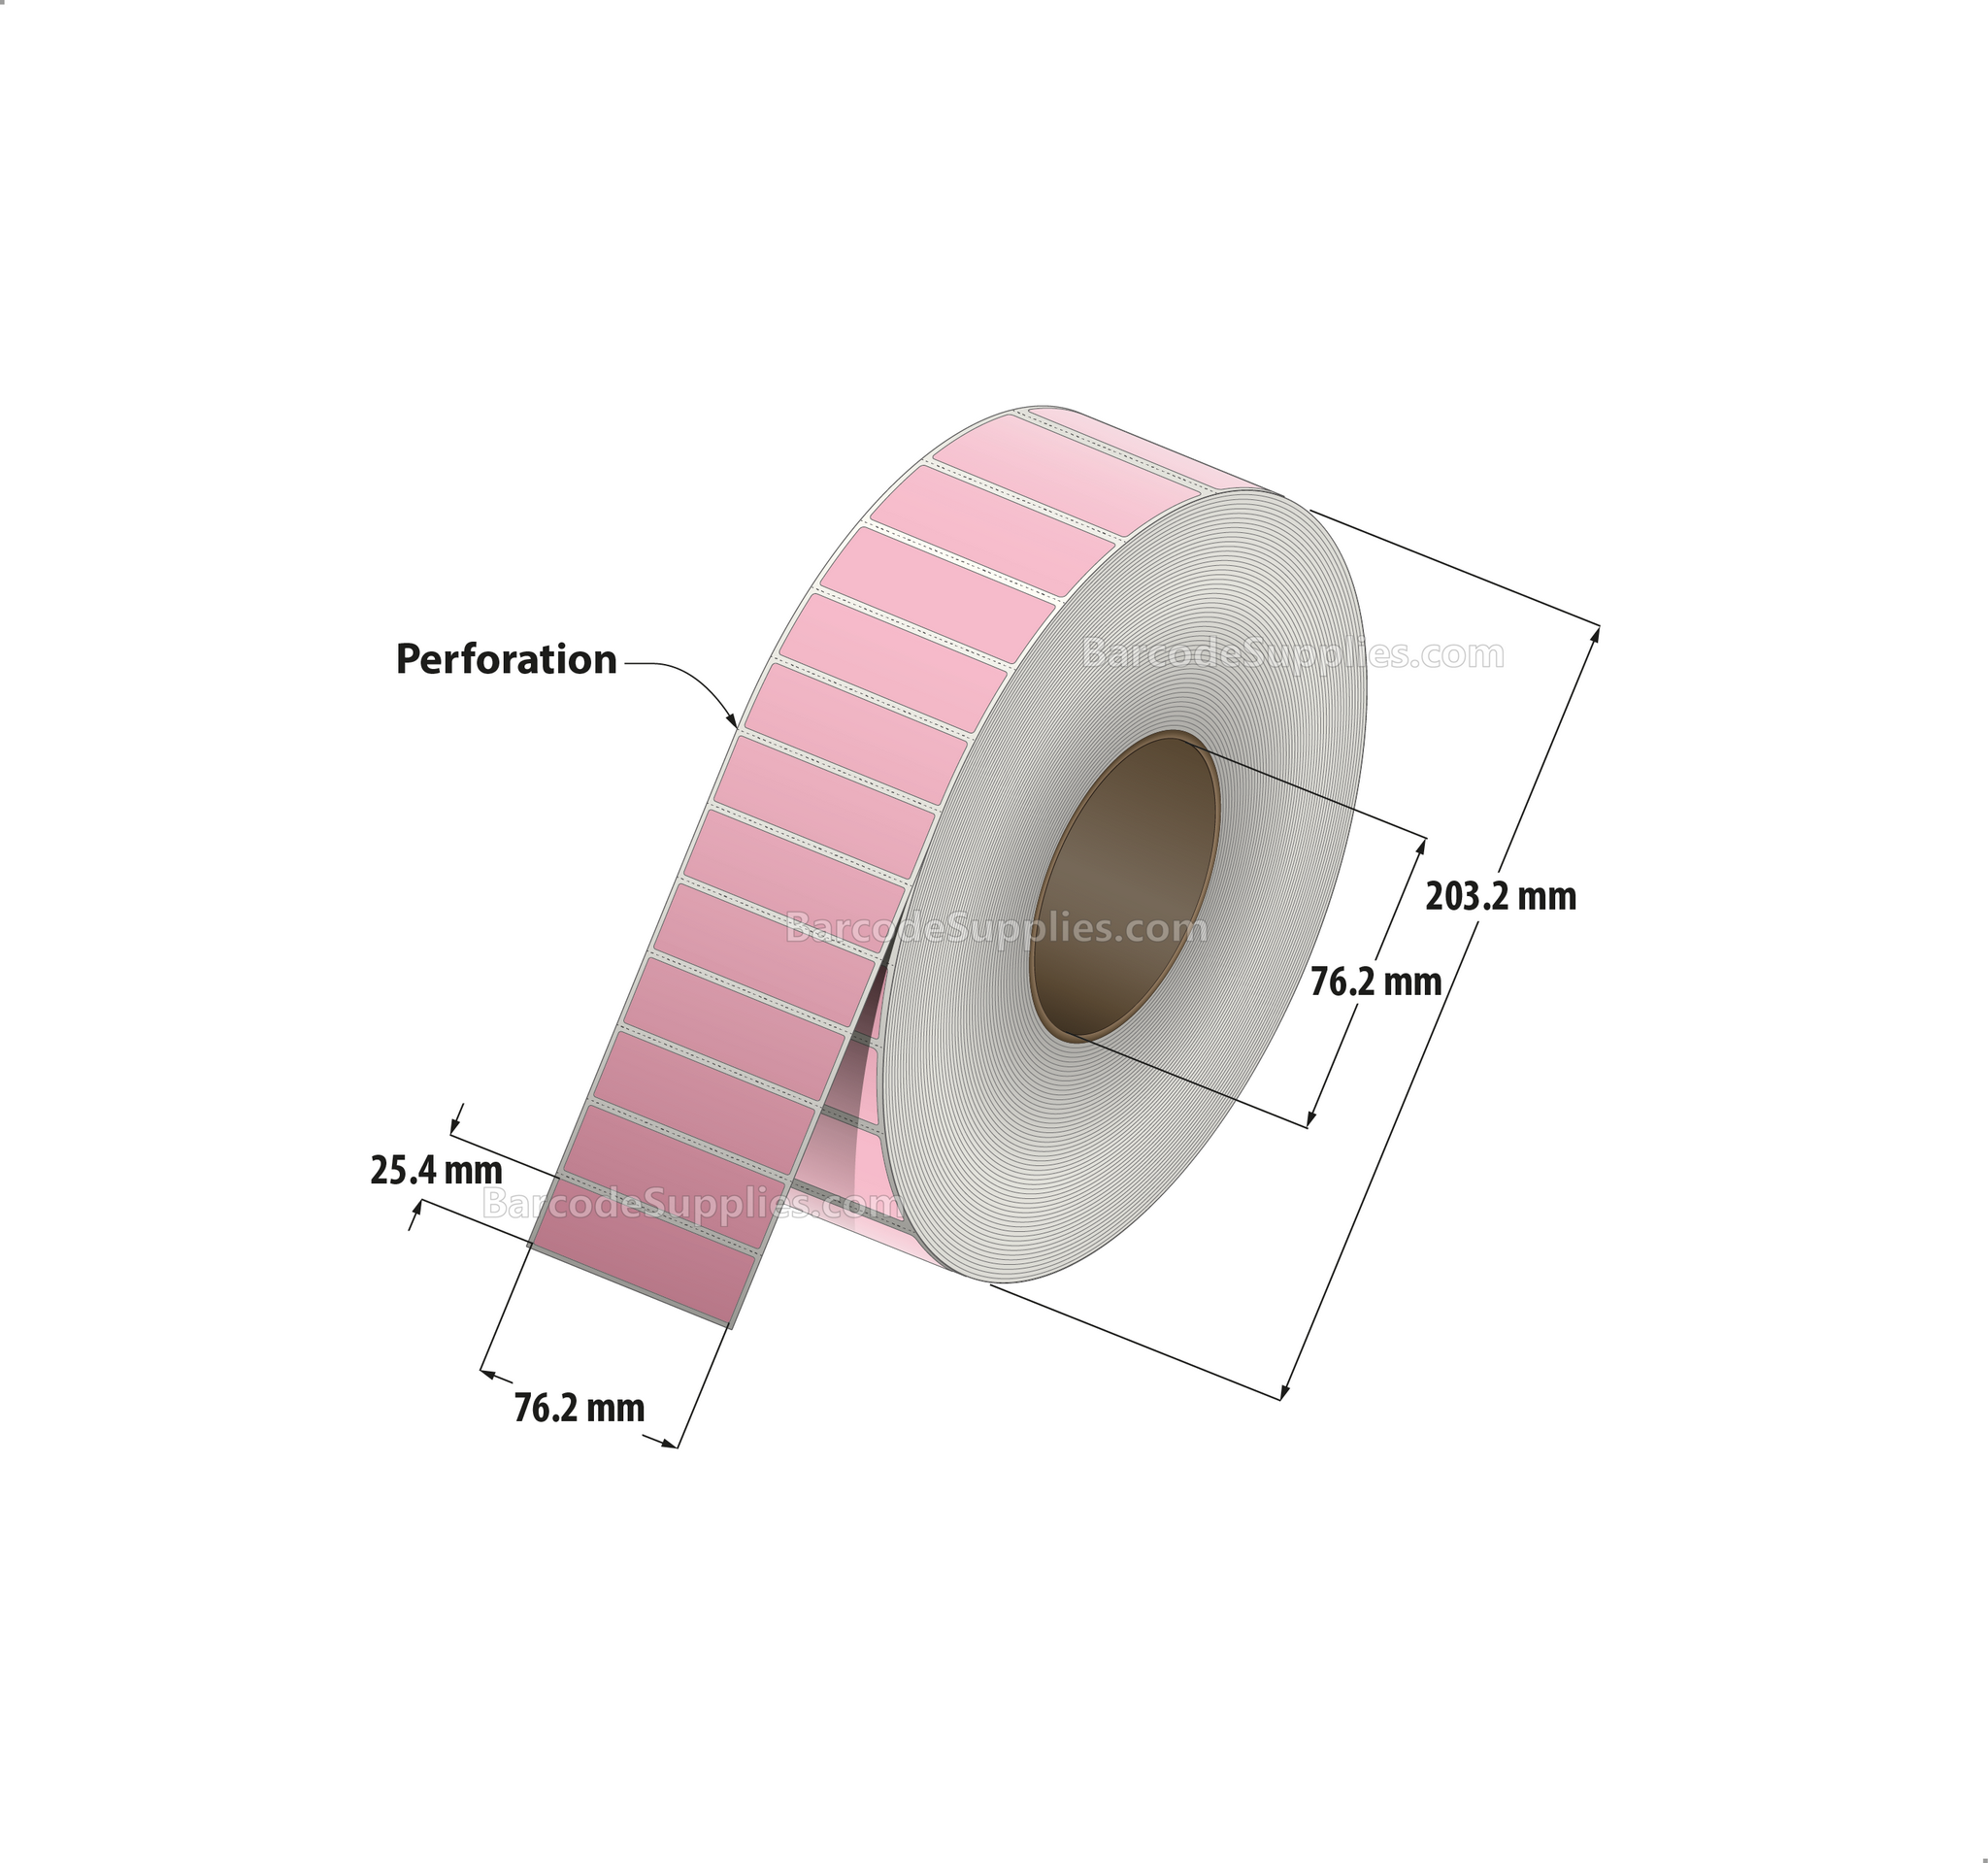 3 x 1 Thermal Transfer 176 Pink Labels With Permanent Adhesive - Perforated - 5500 Labels Per Roll - Carton Of 8 Rolls - 44000 Labels Total - MPN: RFC-3-1-5500-PK